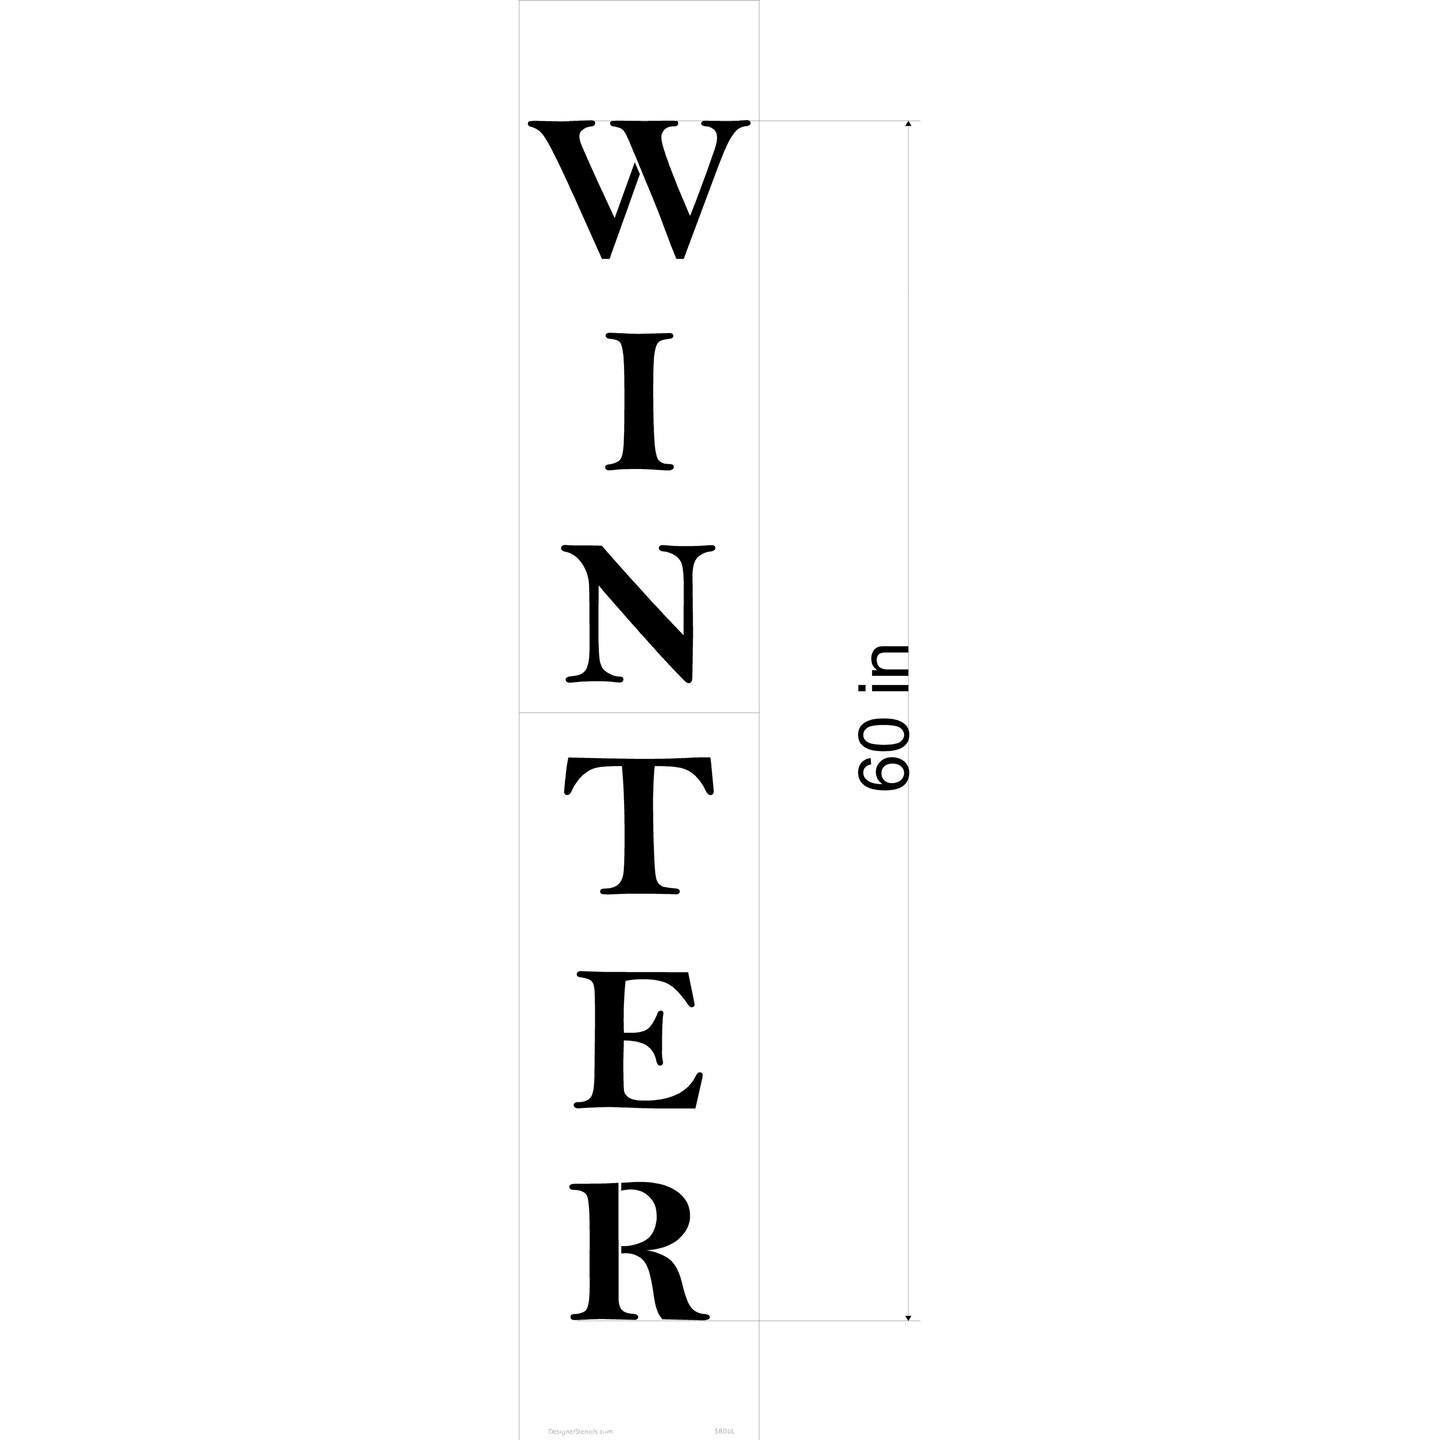 60-Inch Winter Tall Wall Stencil | 3806L by Designer Stencils | Word &#x26; Phrase Stencils | Reusable Art Craft Stencils for Painting on Walls, Canvas, Wood | Reusable Plastic Paint Stencil for Home Makeover | Easy to Use &#x26; Clean Art Stencil